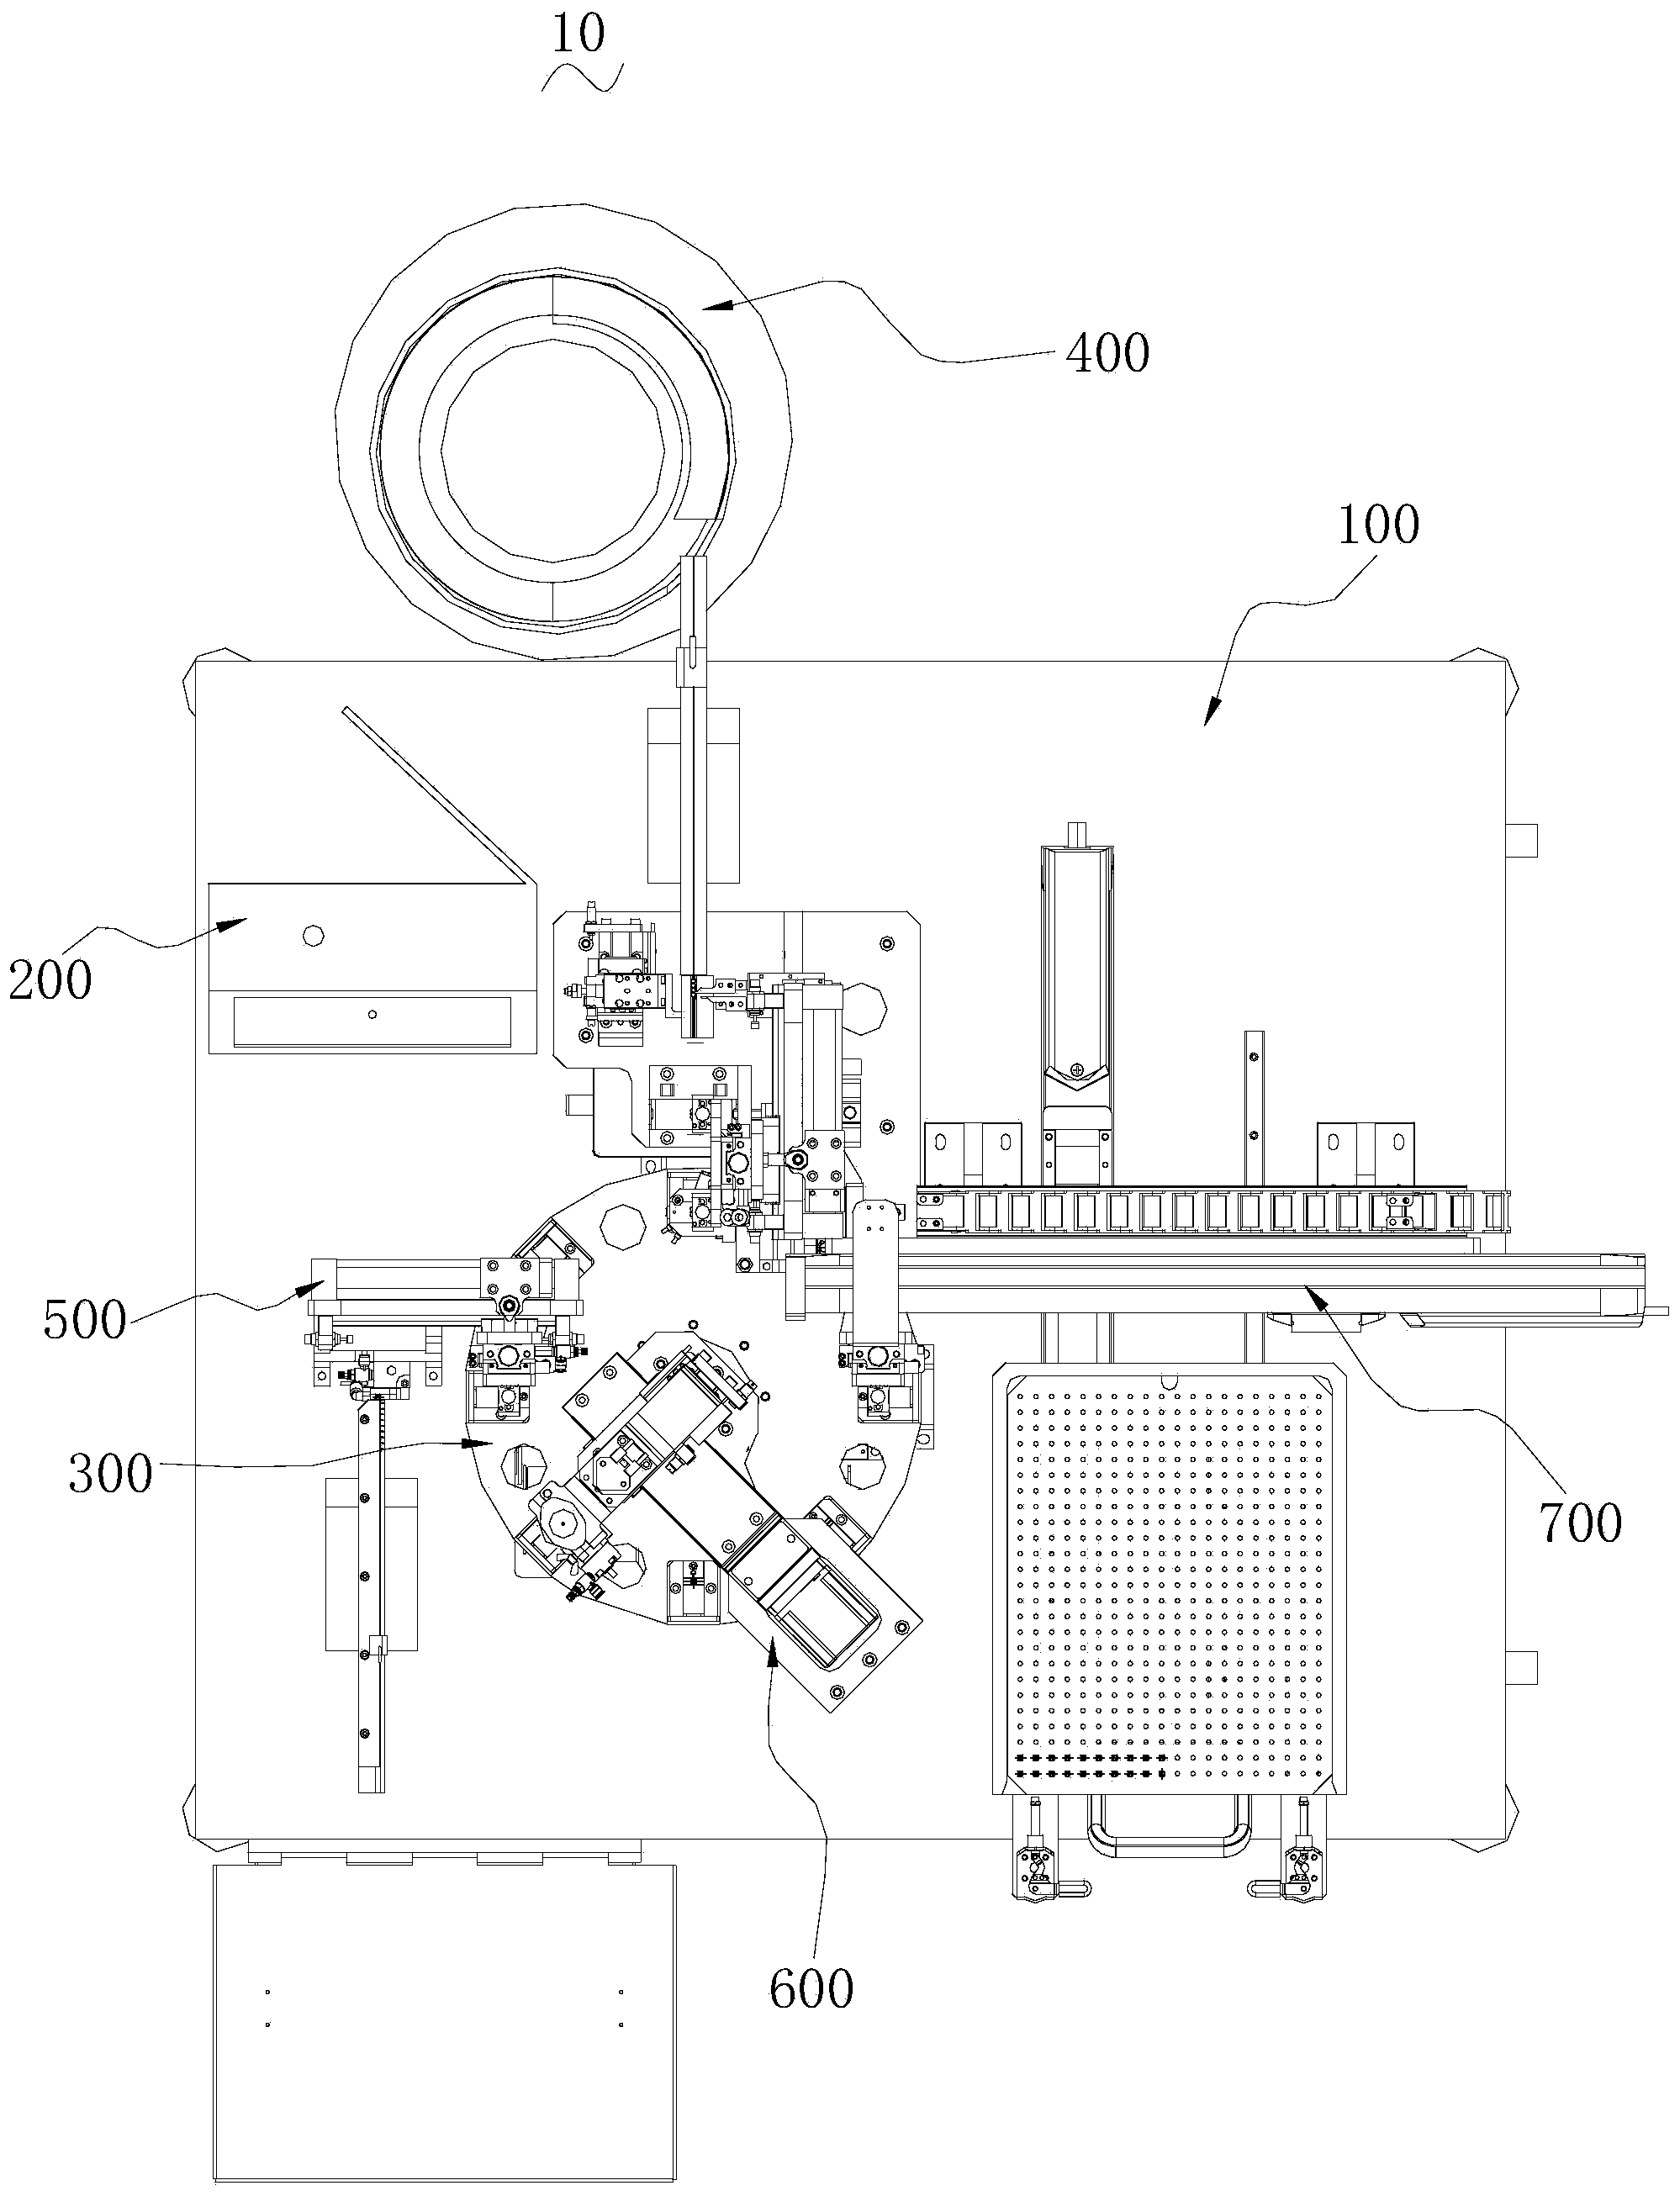 Automatic assembling machine for manufacturing LED (Light Emitting Diode) connection kit